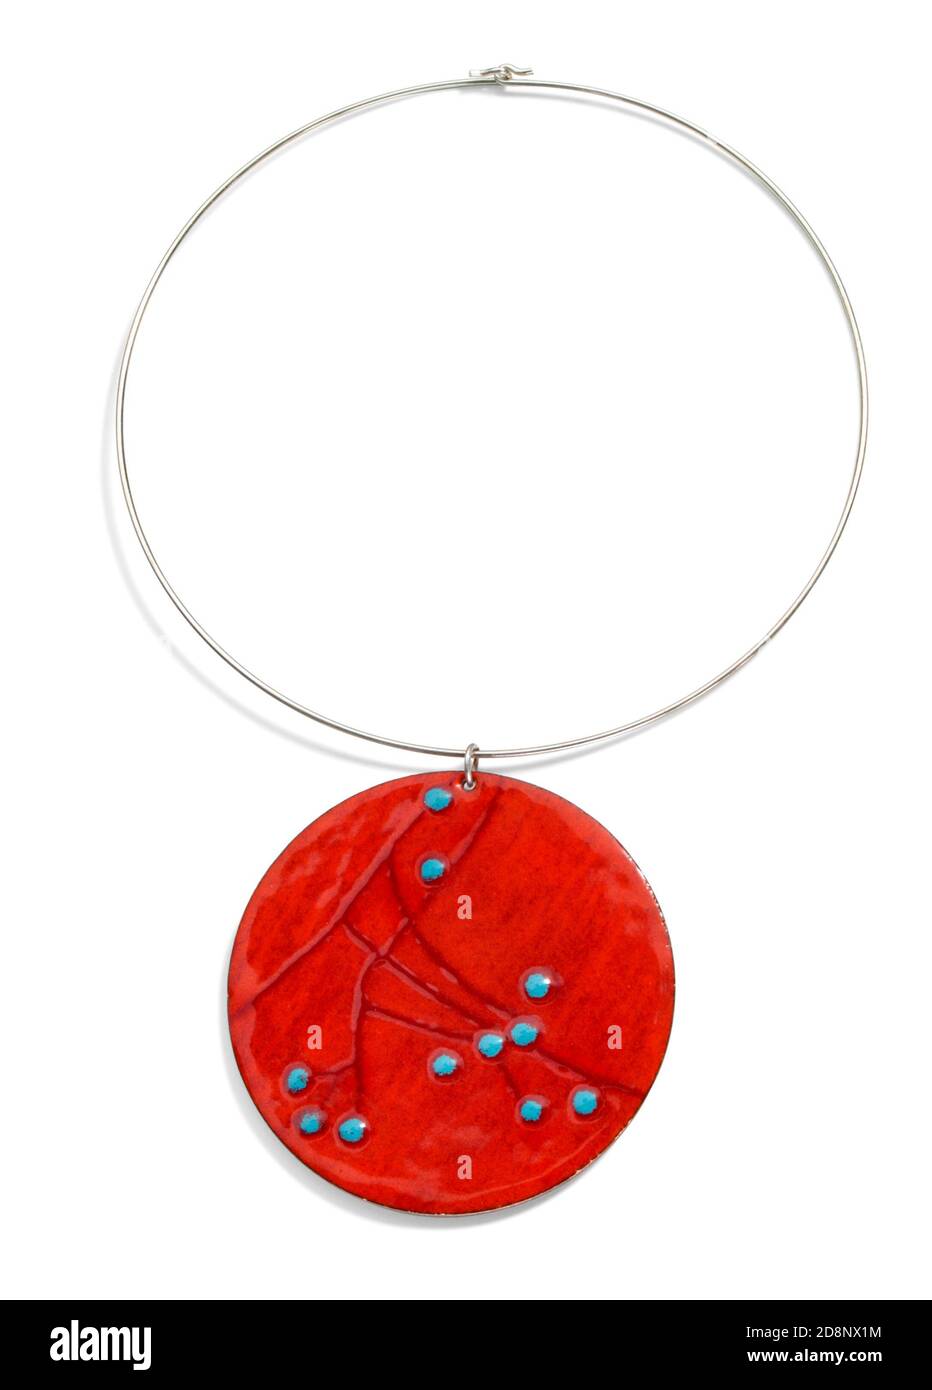 hand painted red and blue enamel round pendant on a choker necklace photographed on a white background Stock Photo